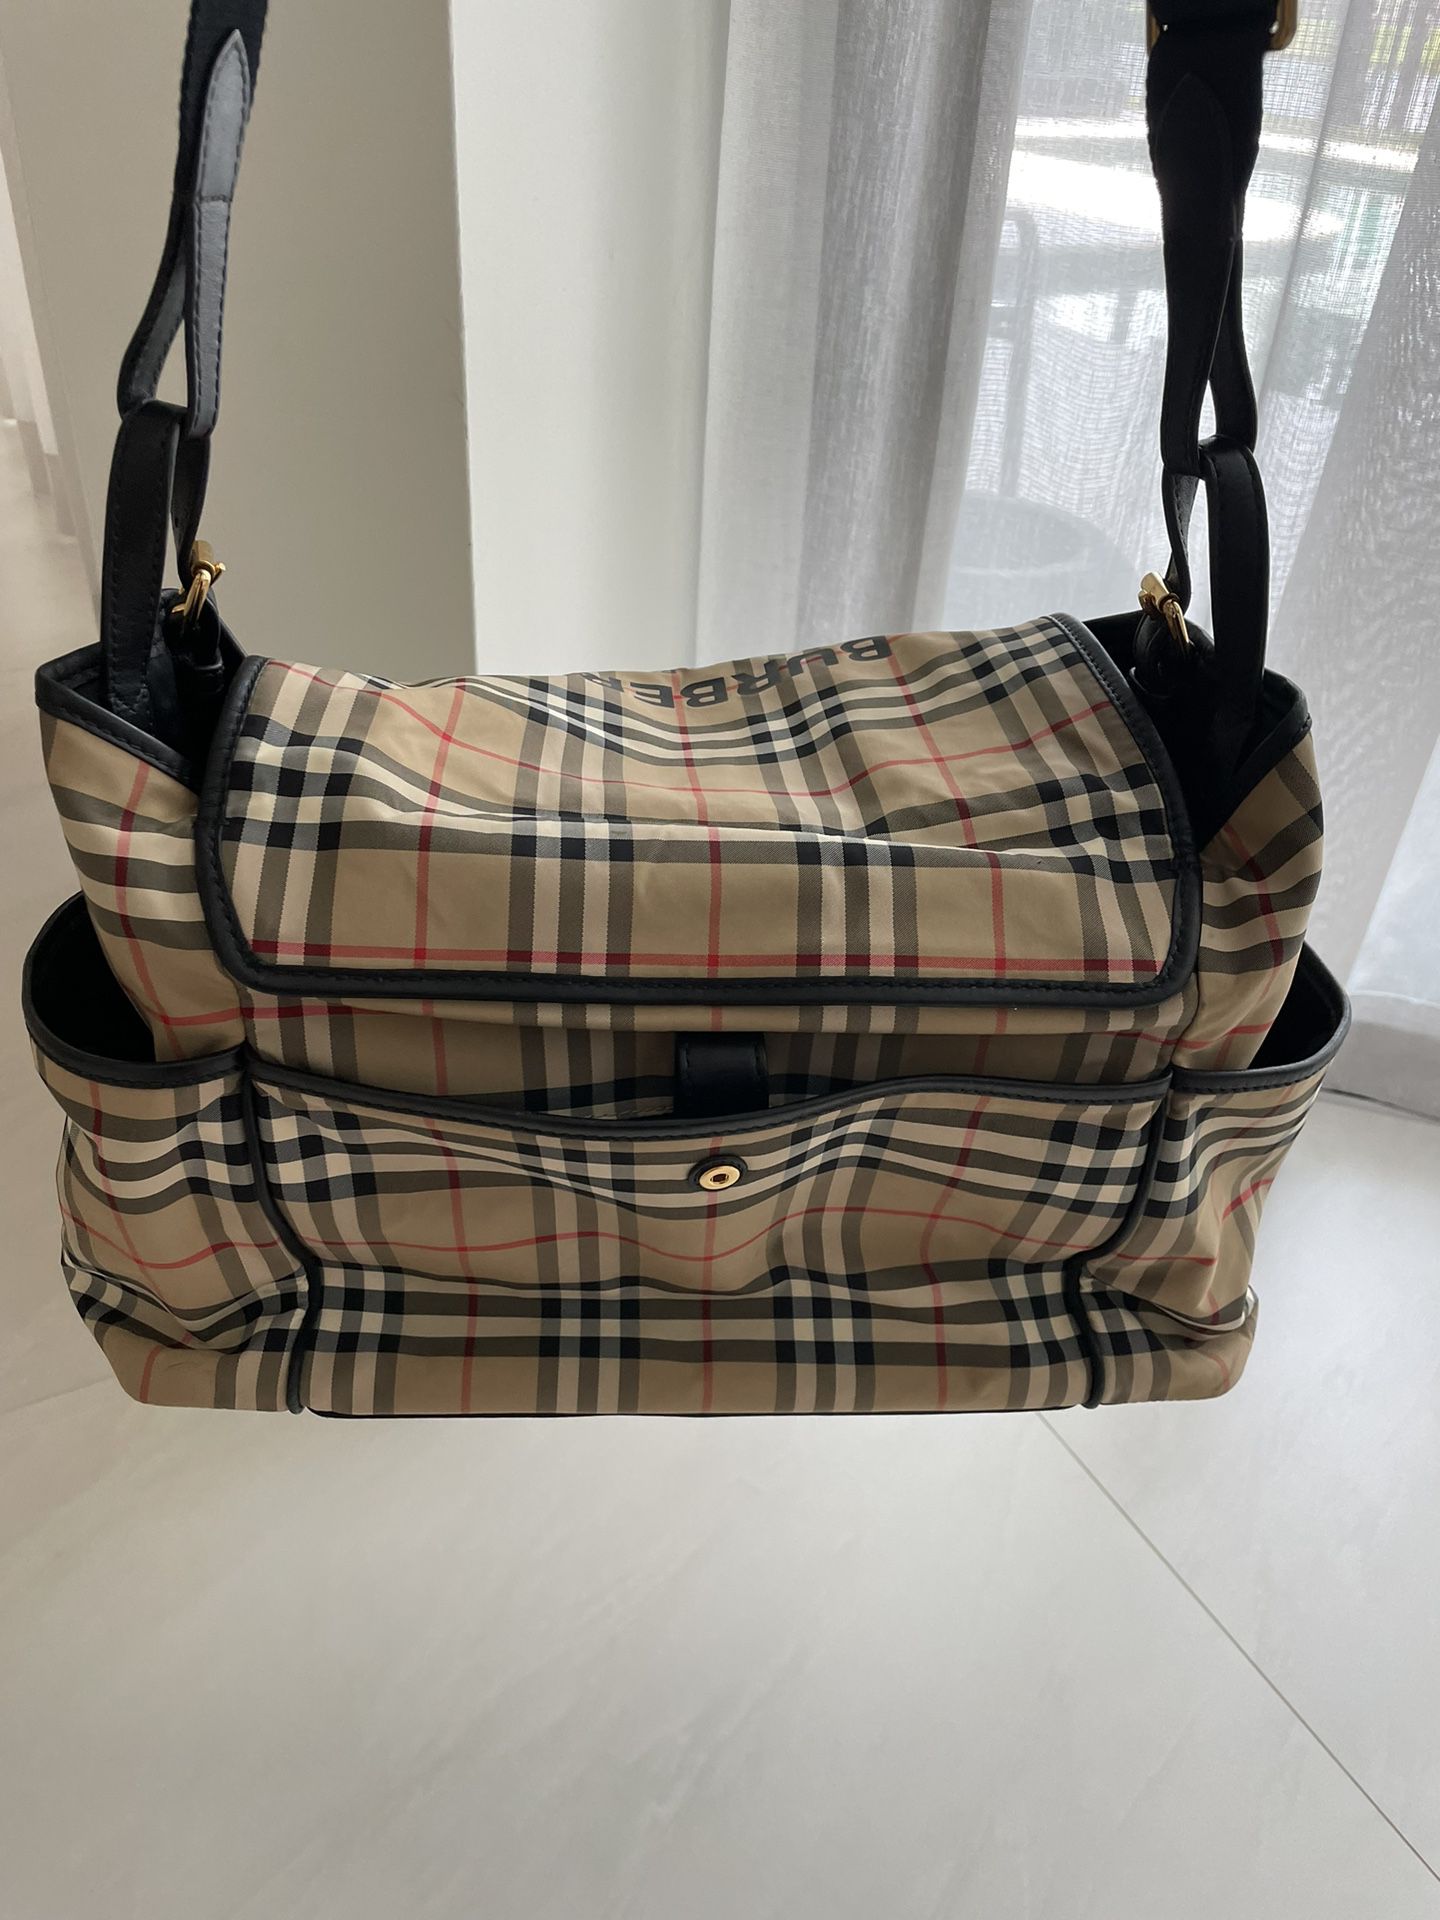 Burberry Baby Bag (Vintage Check Nylon Baby Changing Bag) for Sale in Boca  Raton, FL - OfferUp